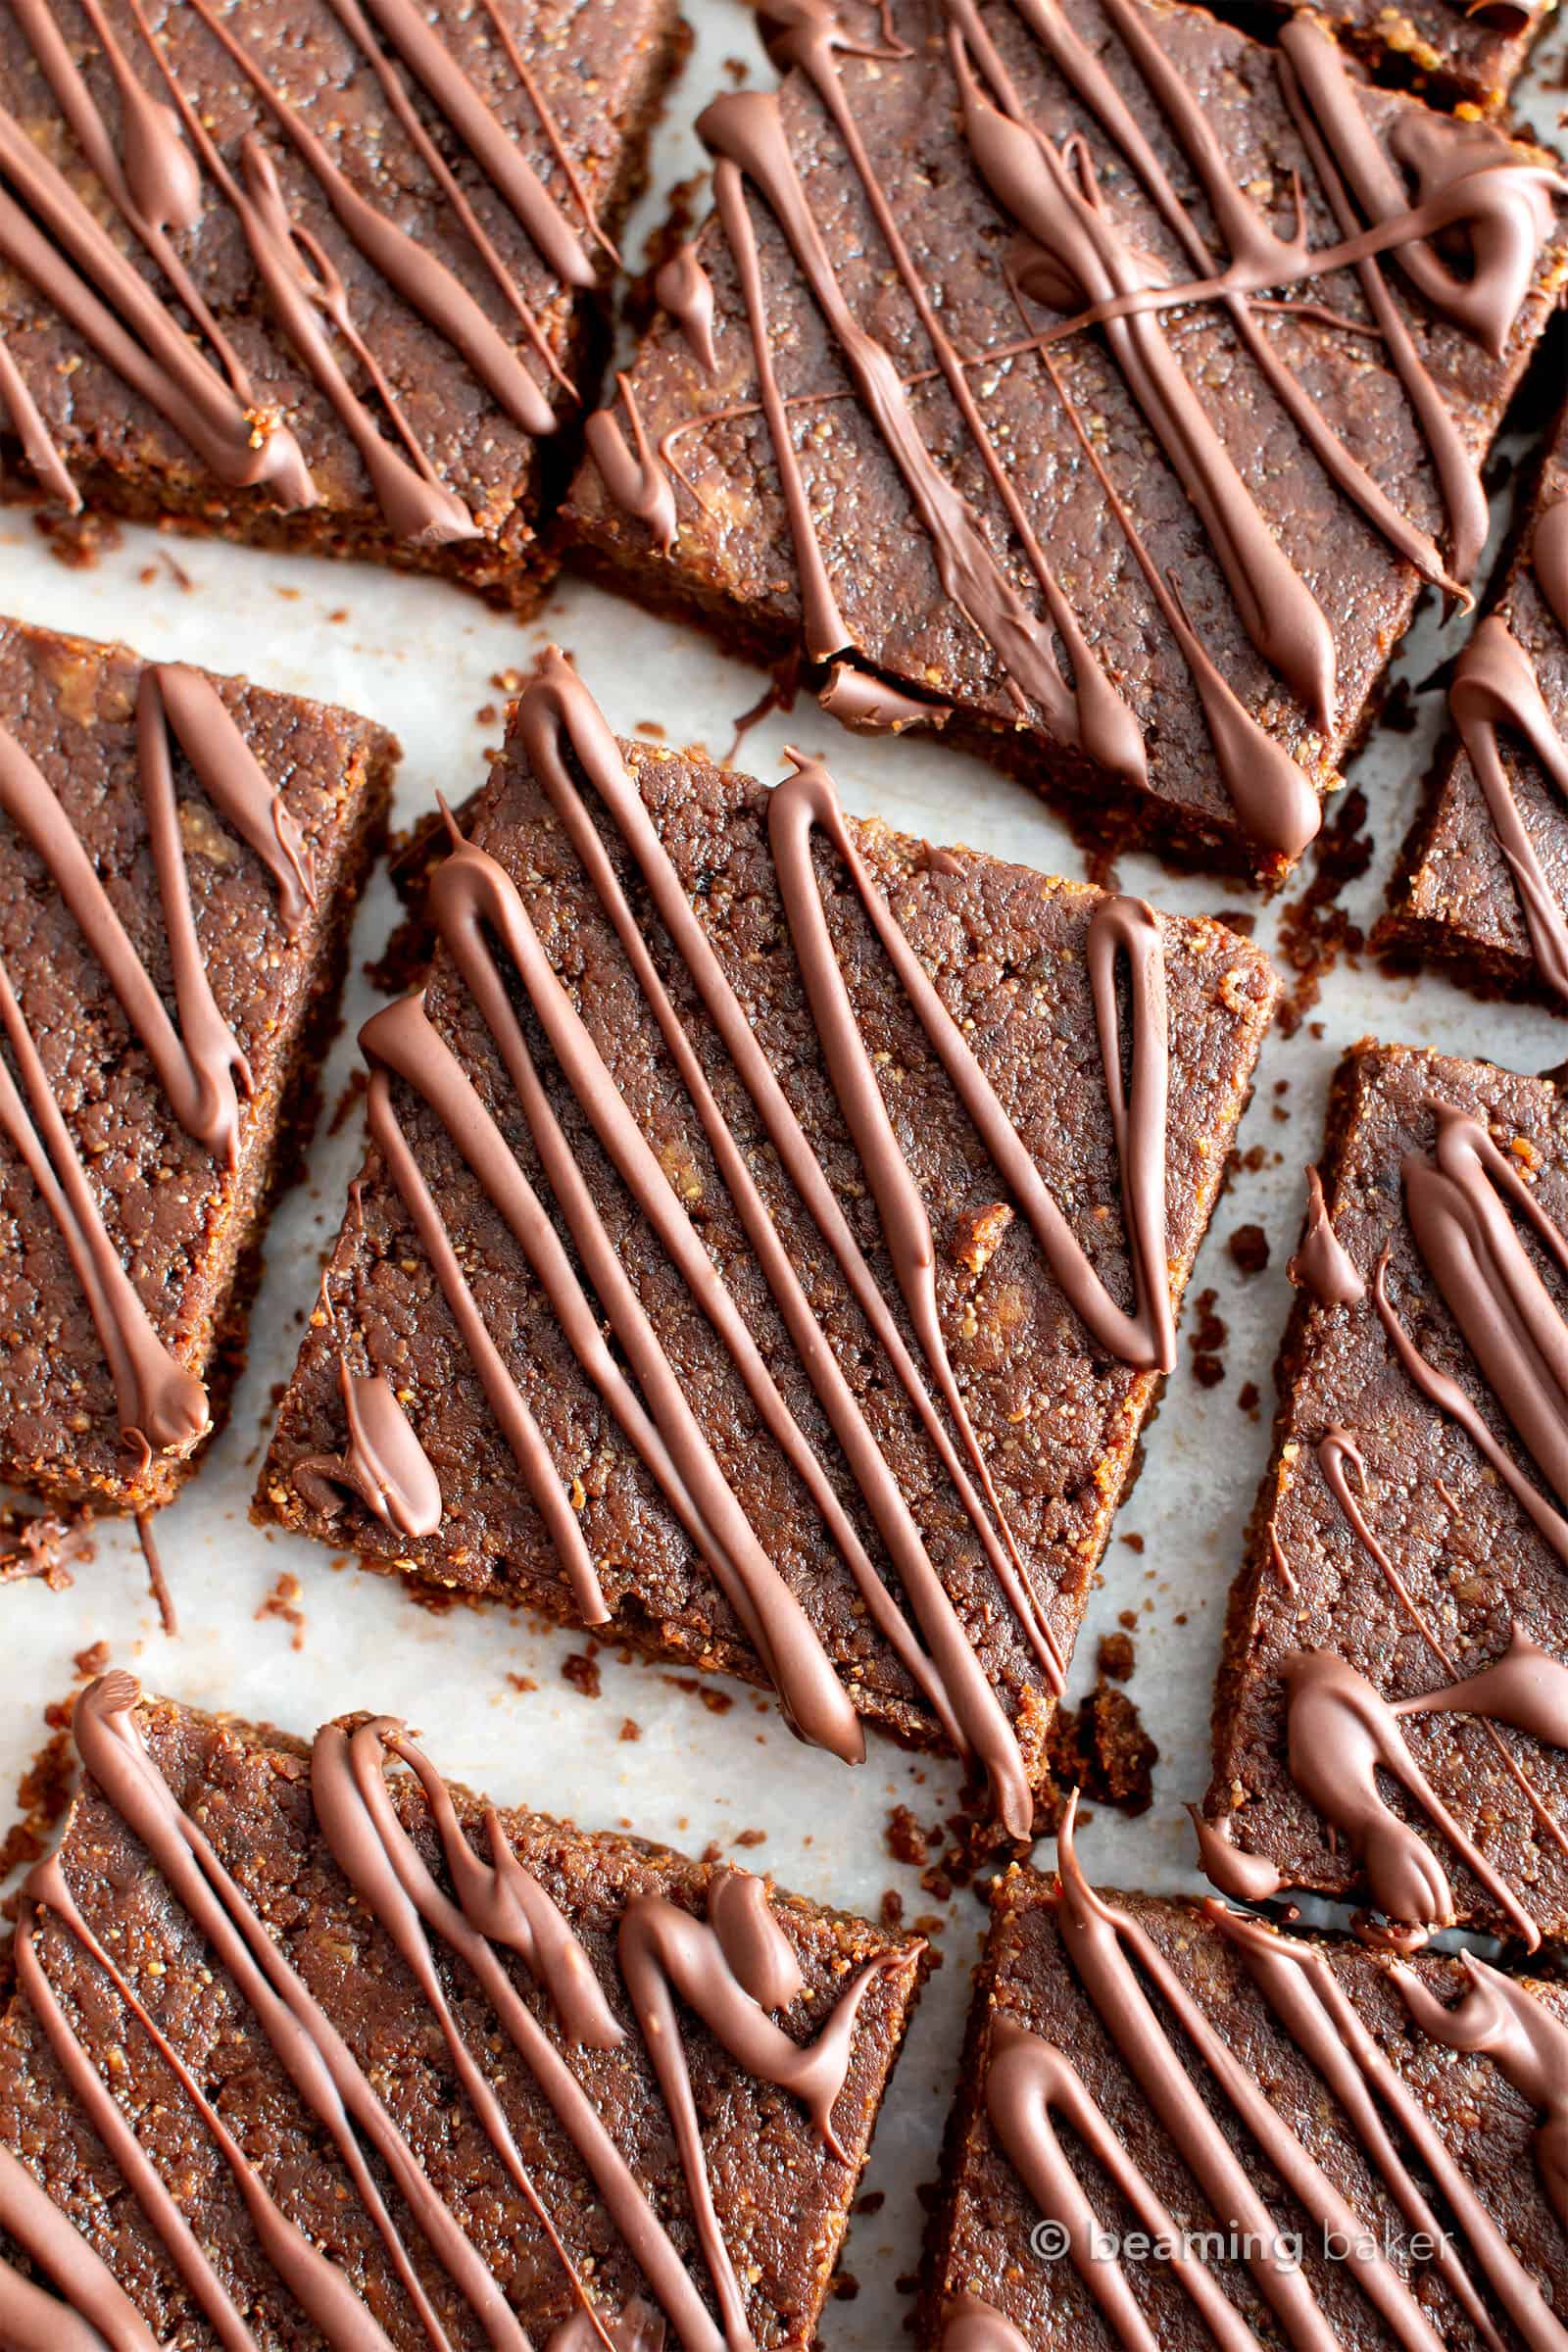 Satisfy Your Chocolate Cravings With This 3-Ingredient No-Baked Chocolate Brownies  